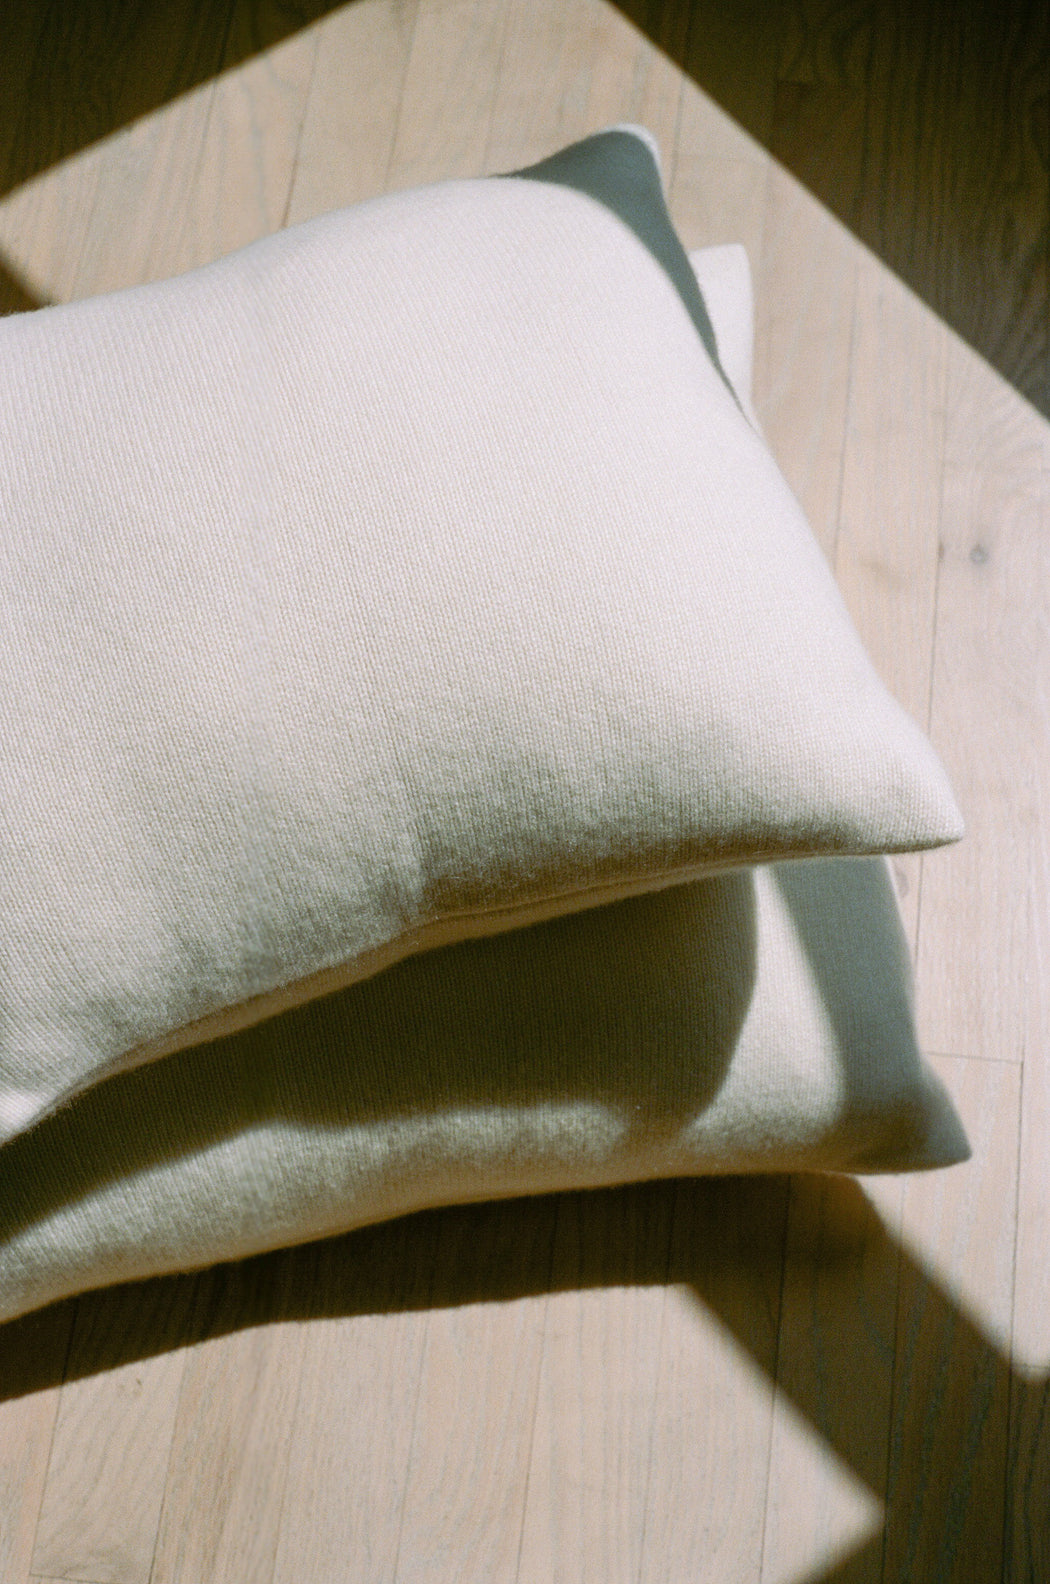 Bespoke 20" Italian Cashmere Jersey Knit Down Pillow - Custom Colors Made to Order (8-Week Lead Time)